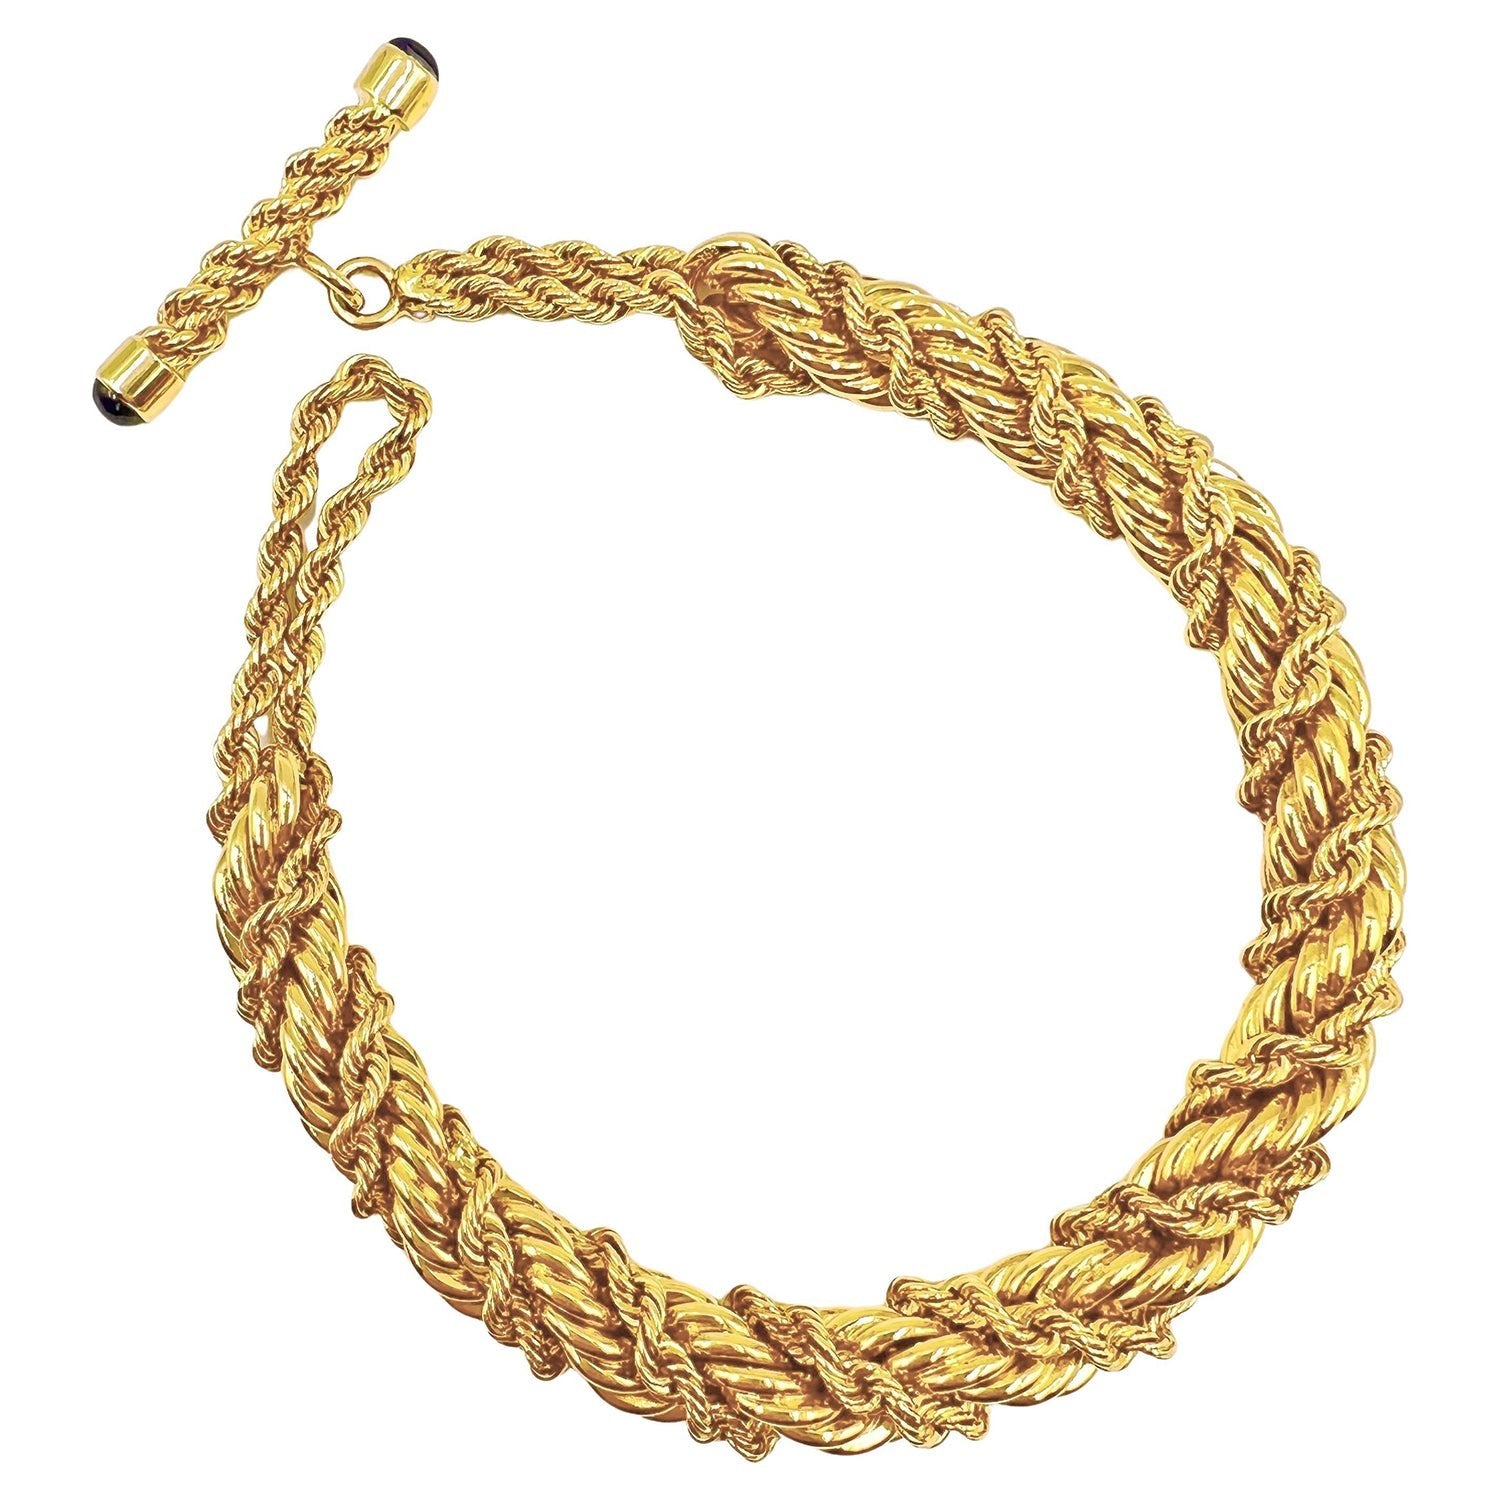 Estate Collection - Tiffany Schlumberger 18k Yellow Gold Rope-Twist Bracelet